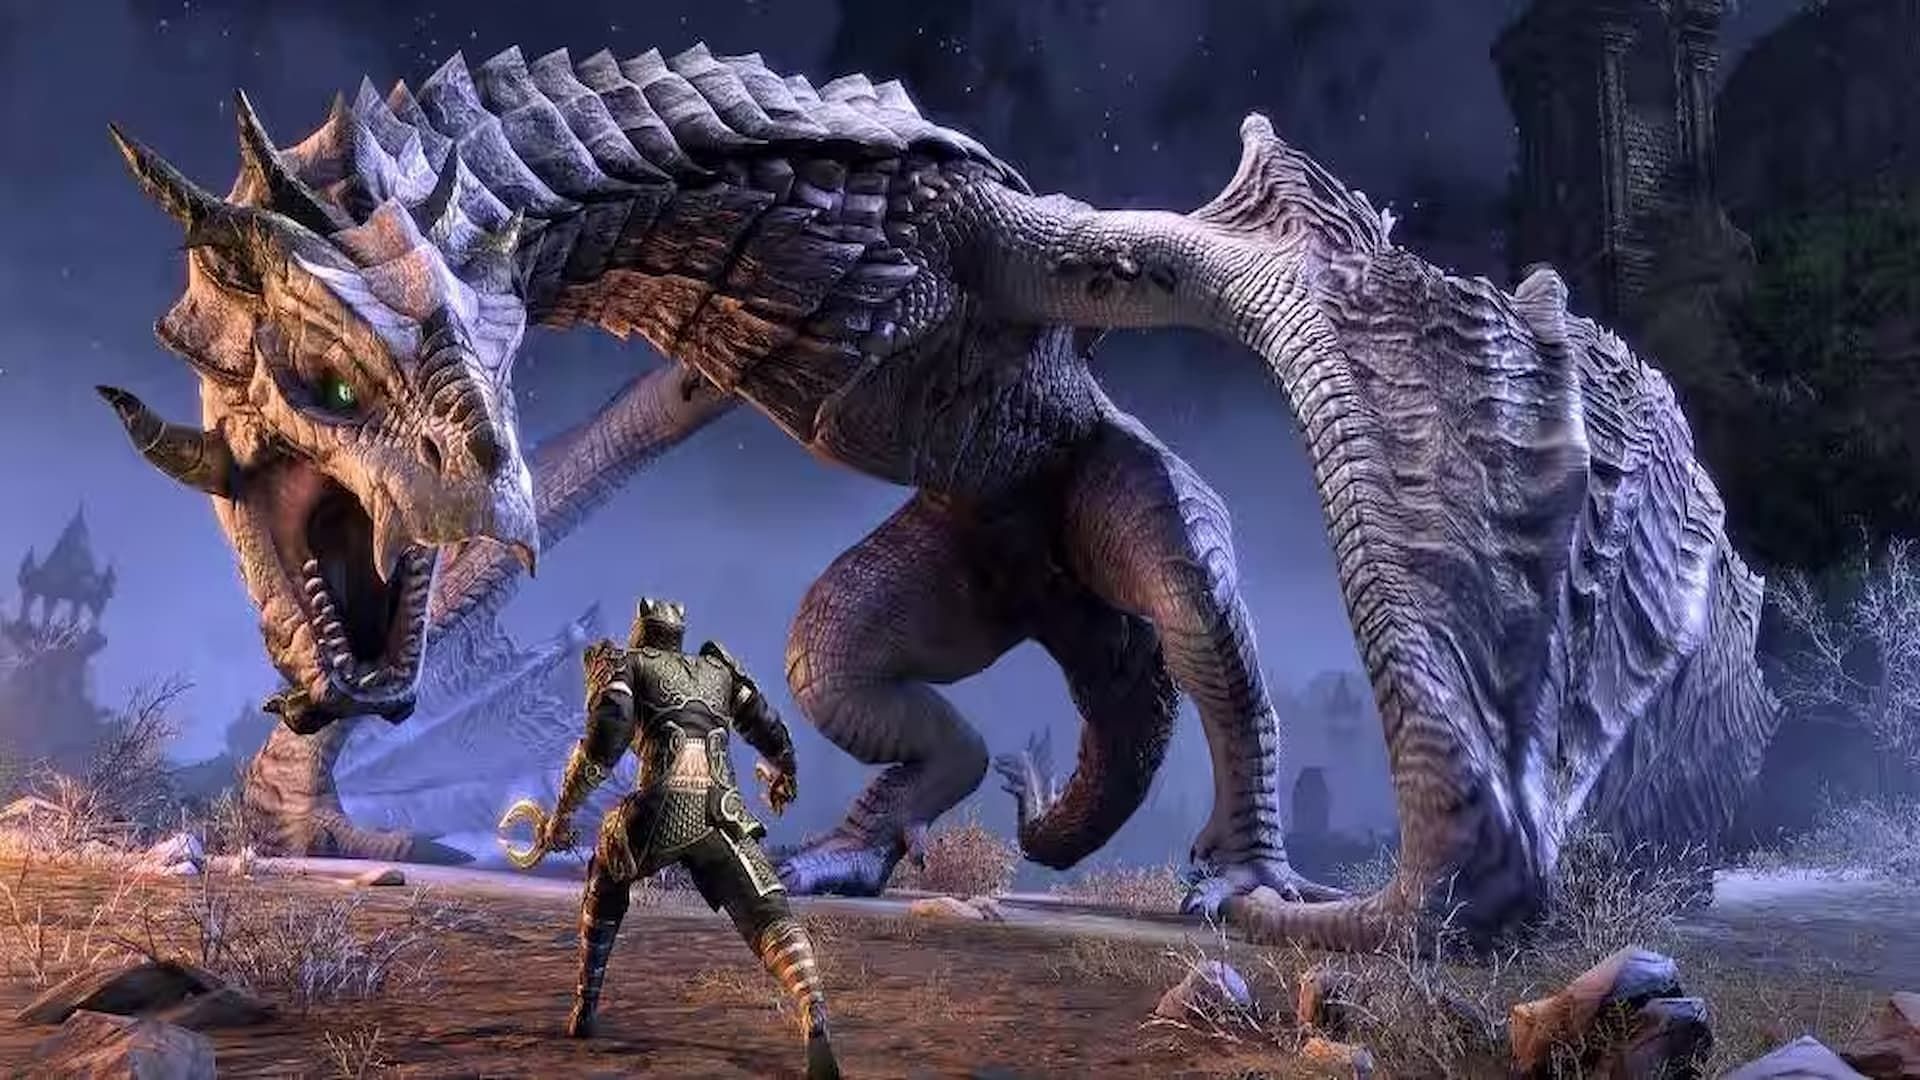 Players can battle the dragon bosses from the Sunspire trial in Endless Archive (Image via ZeniMax Online Studios)